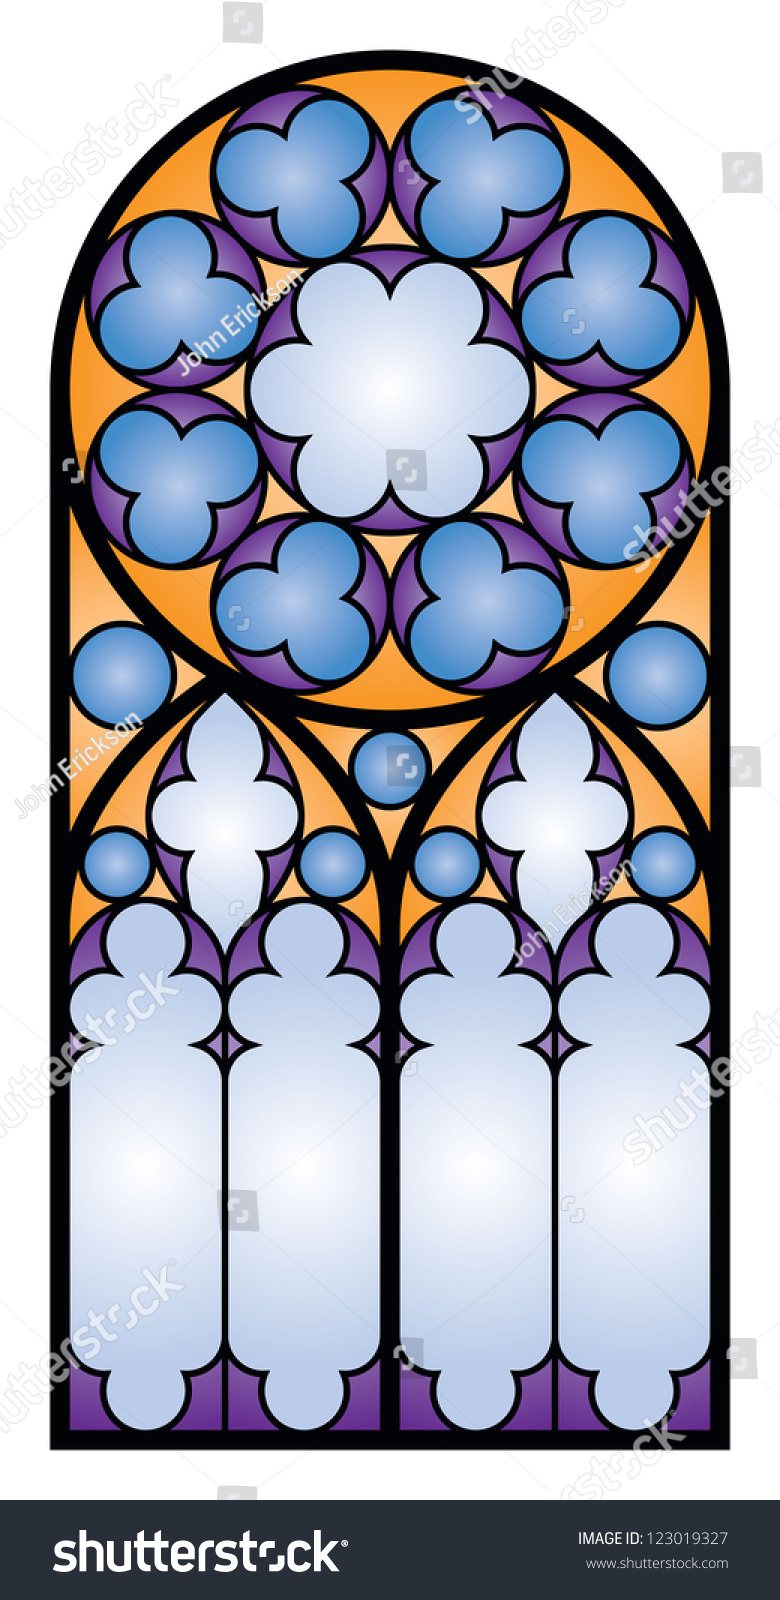 stained glass window clipart - photo #39